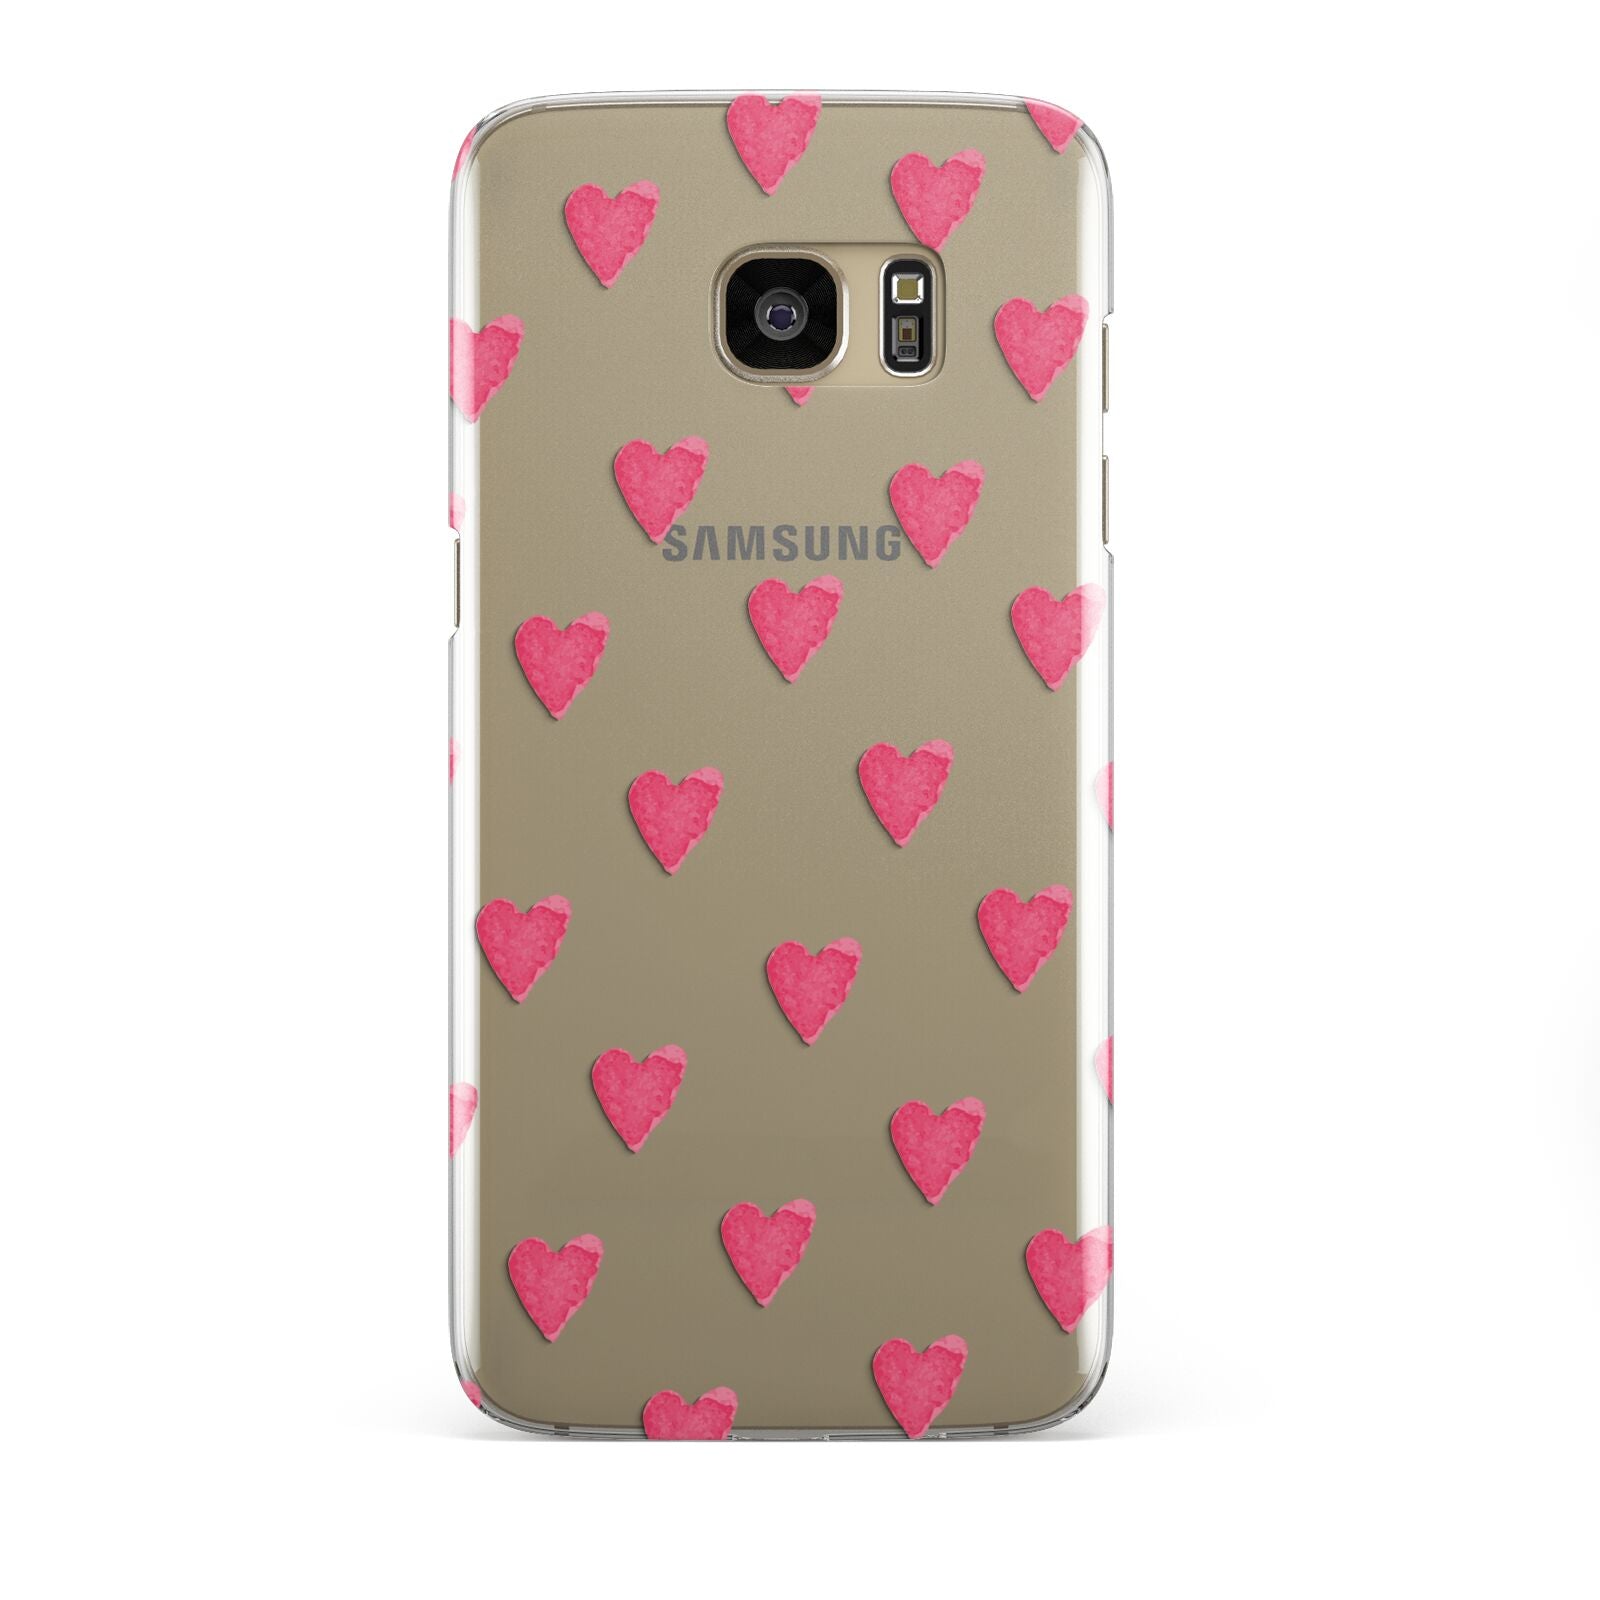 Heart Patterned Samsung Galaxy S7 Edge Case